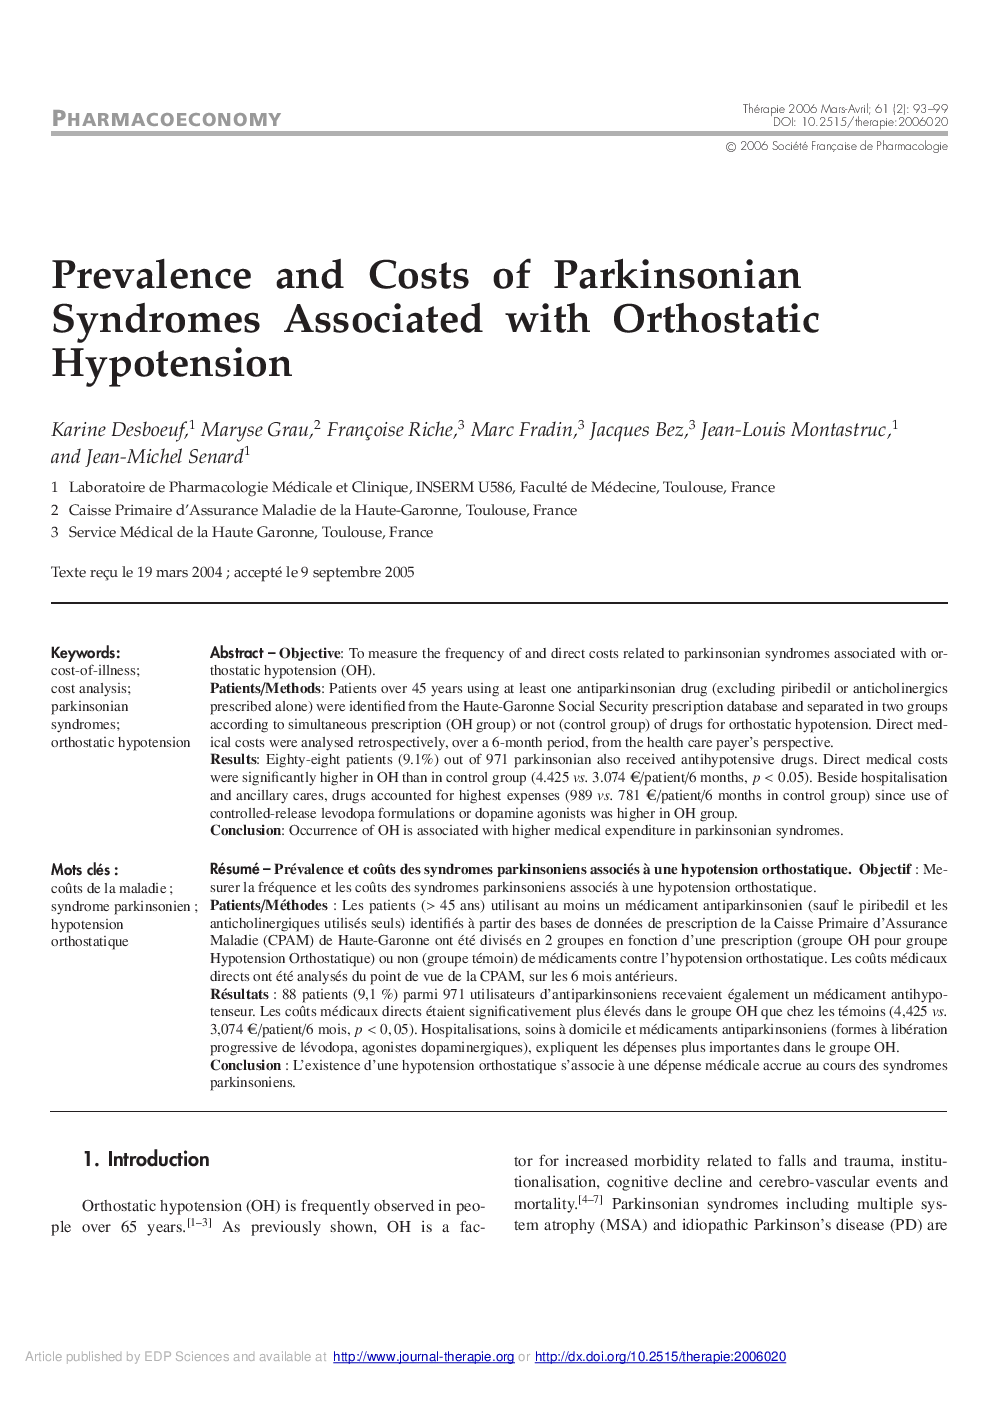 Prevalence and Costs of Parkinsonian Syndromes Associated with Orthostatic Hypotension